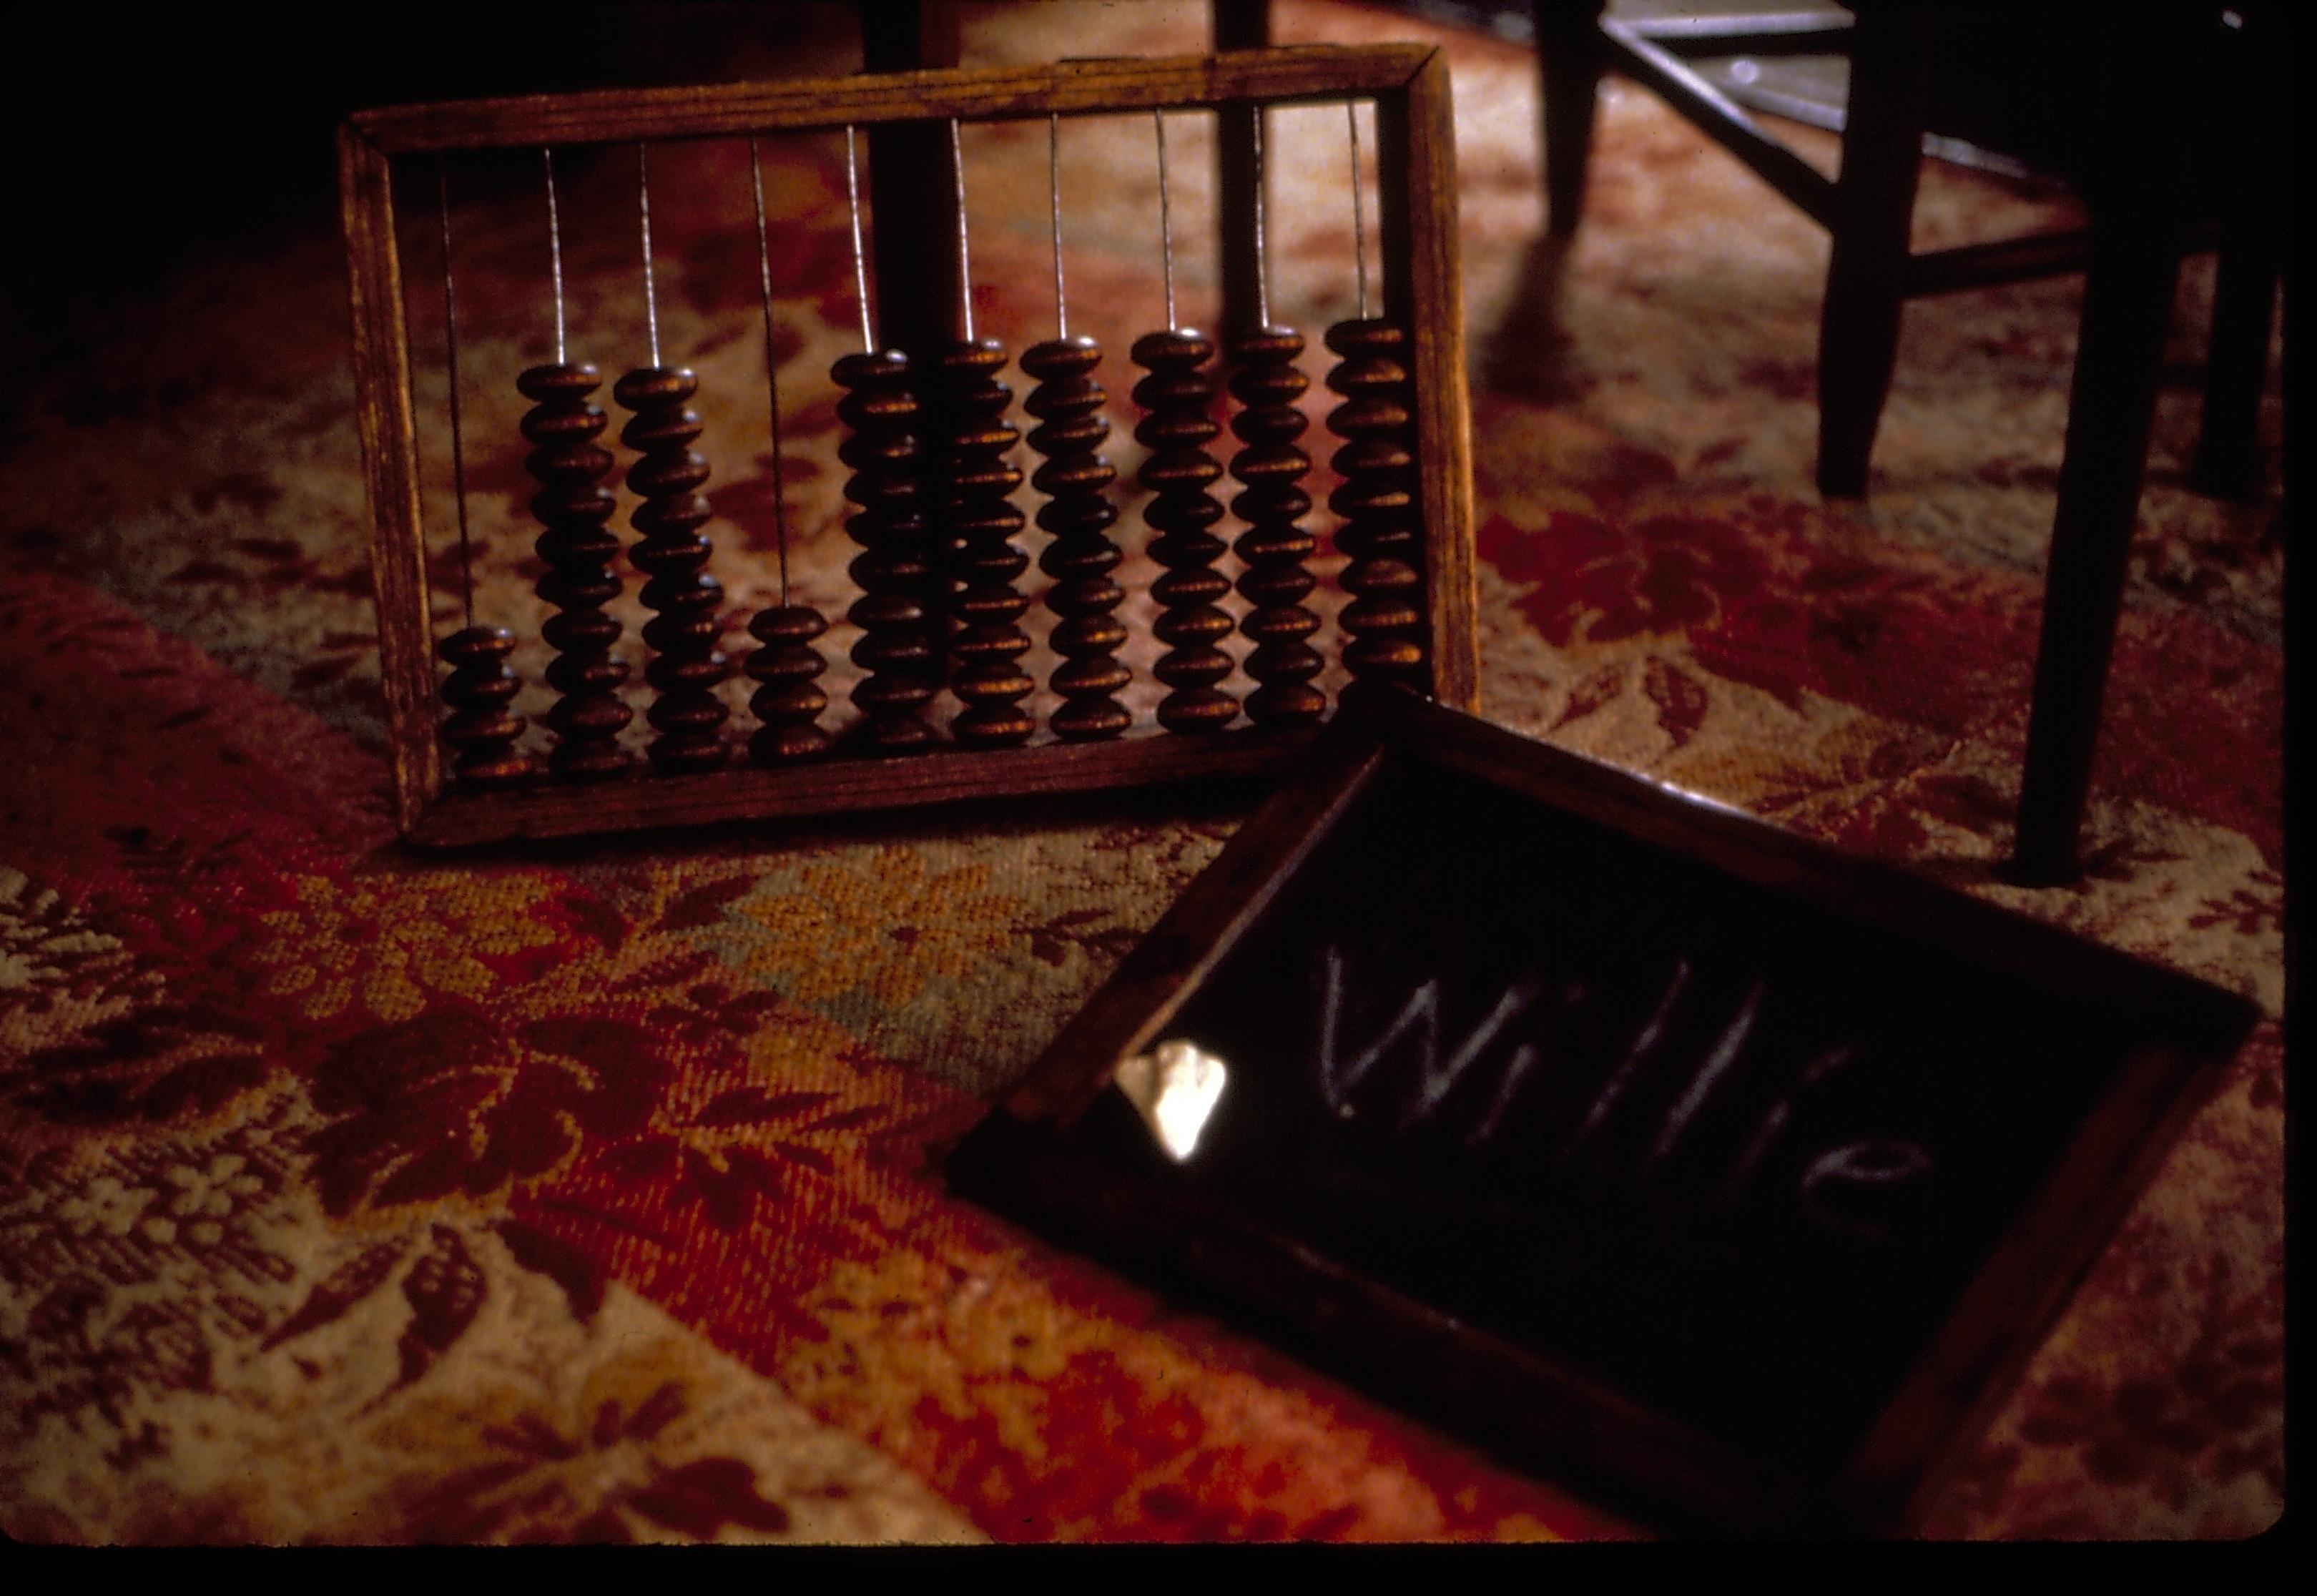 Boys Room (now known as Guest Room) detail of toys on the floor covered in period pattern woven carpet. Features an abacus and chalkboard with "Willie" written on it, chairs in background. Carpet is red and white striped with dark brown floral motif over it.